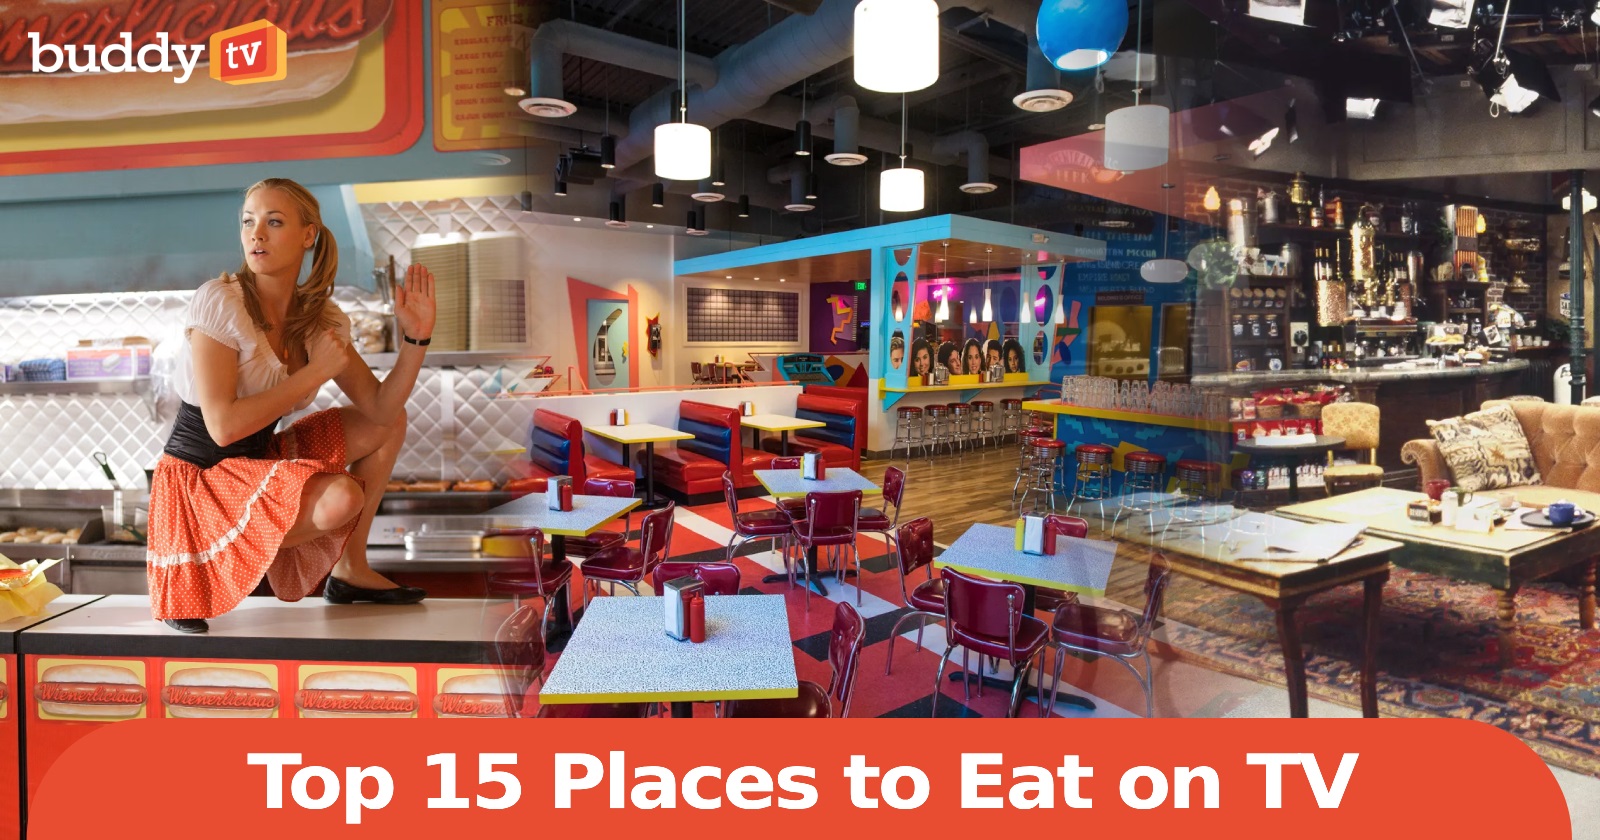 Top 15 Places to Eat on TV